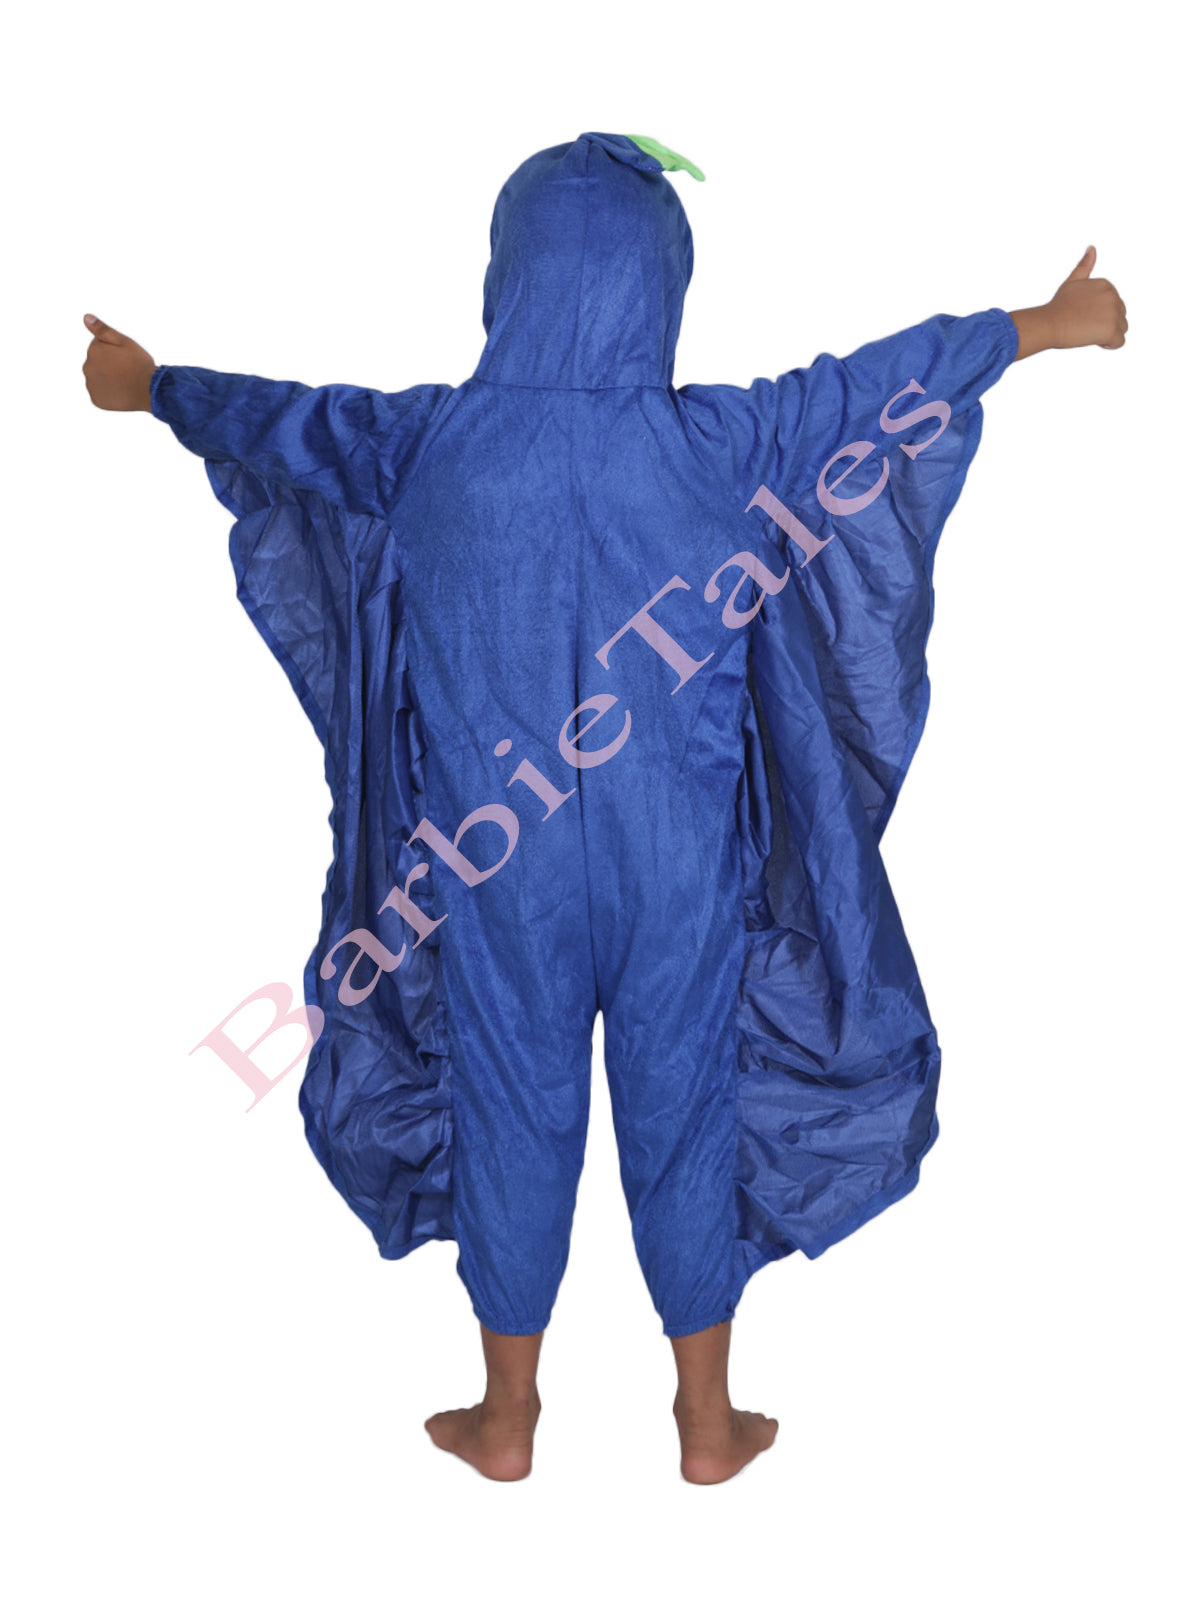 Ohlees Professionally Produced Peacock Mascot Costumes, Fancy Dress Party  Costume Adult Size Free of Charge - China The Peacock Mascot Costume price  | Made-in-China.com